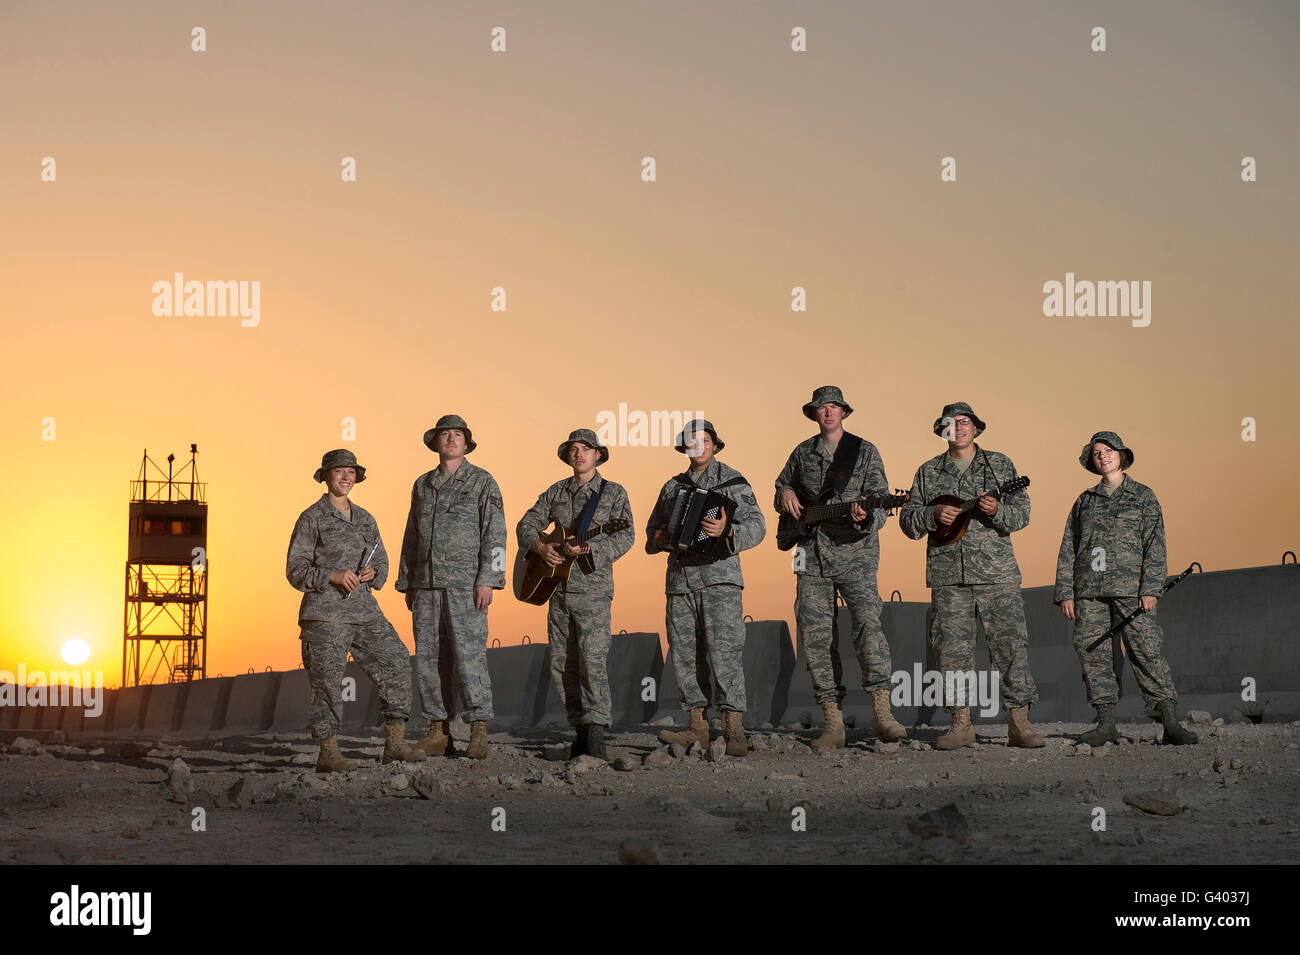 United States Air Forces Zentralband. Stockfoto